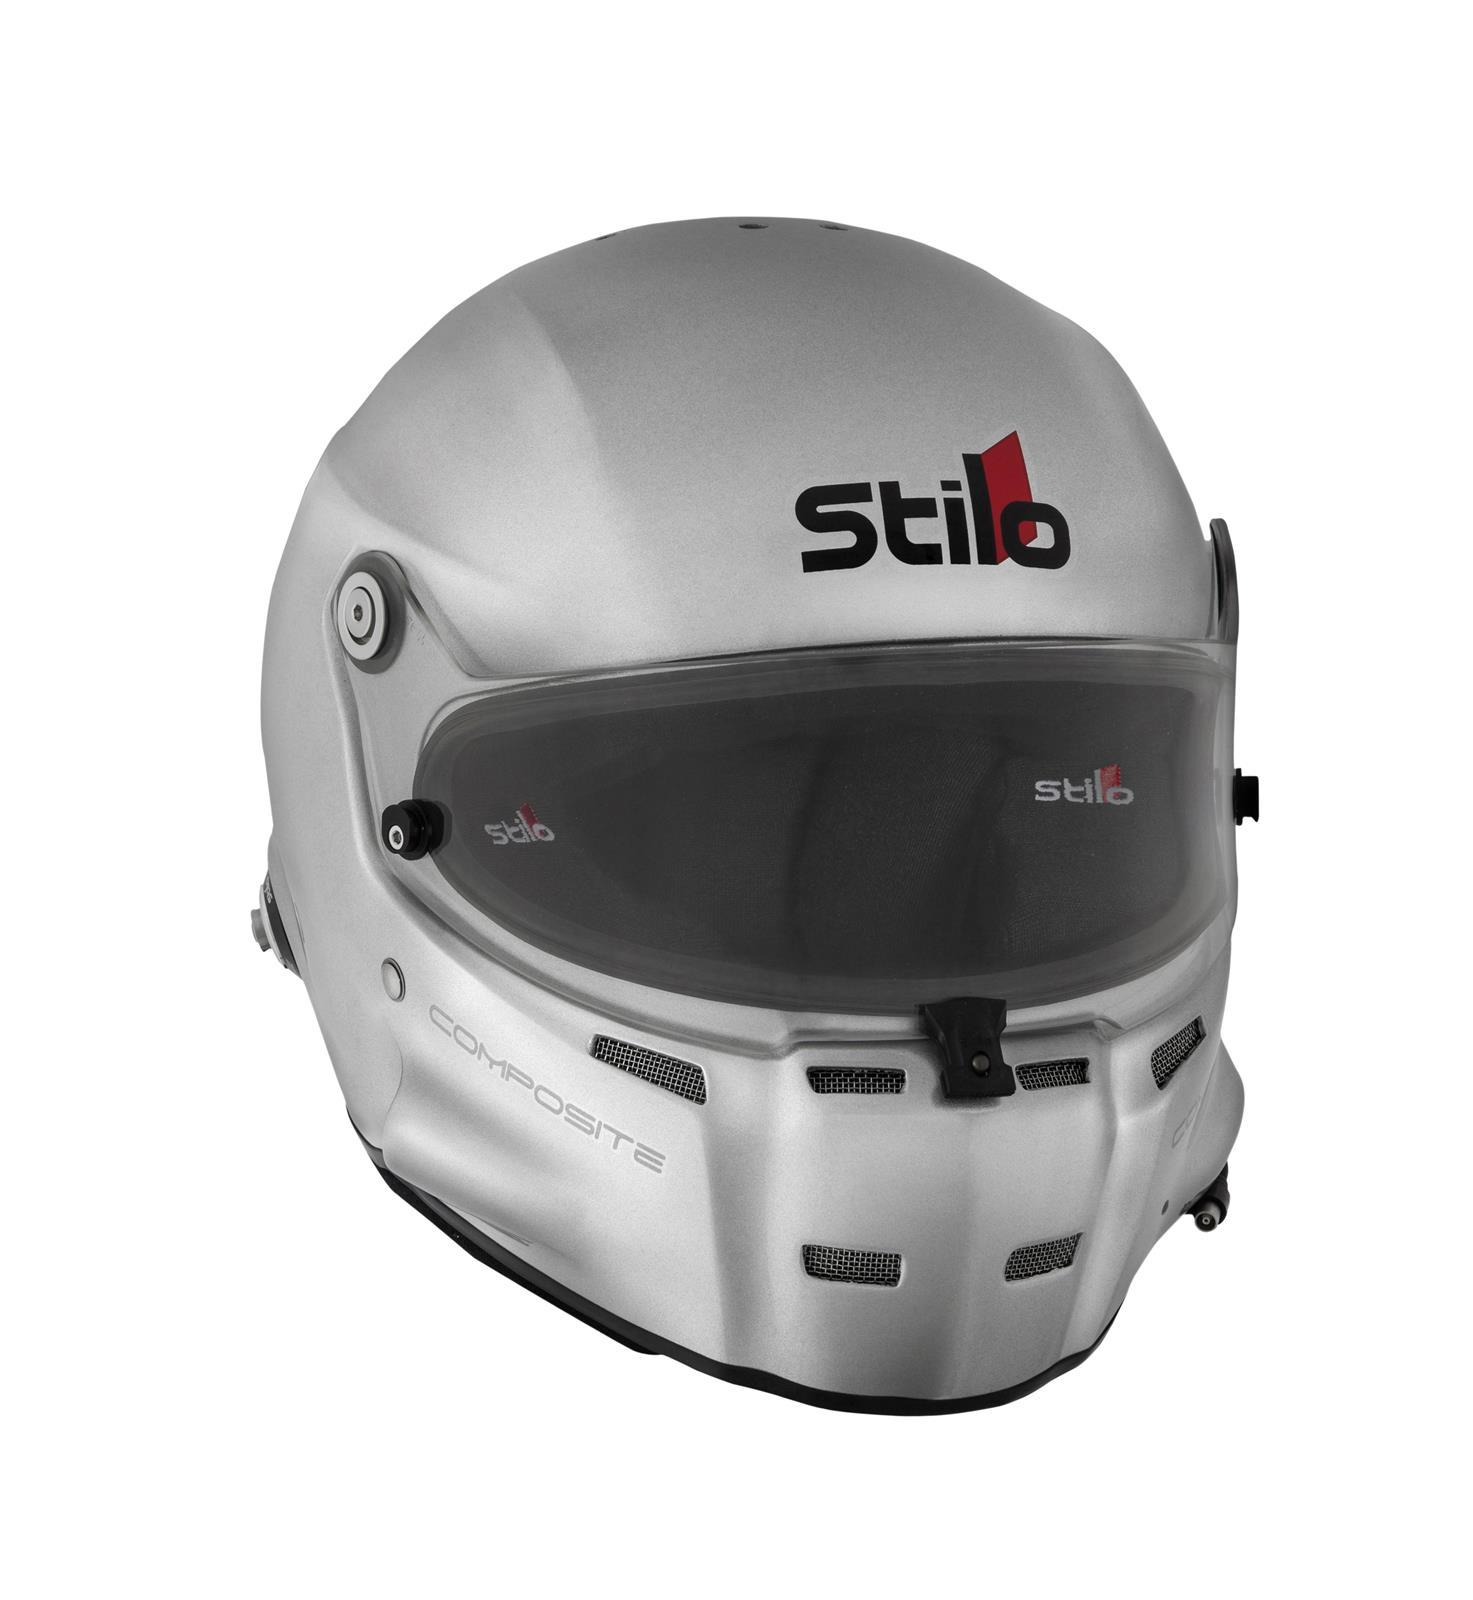 Stilo Helmets AA0700AF2T57 Helmet, ST5 GT, Full Face, Snell SA2020, Head and Neck Support Ready, Silver, Medium, Each